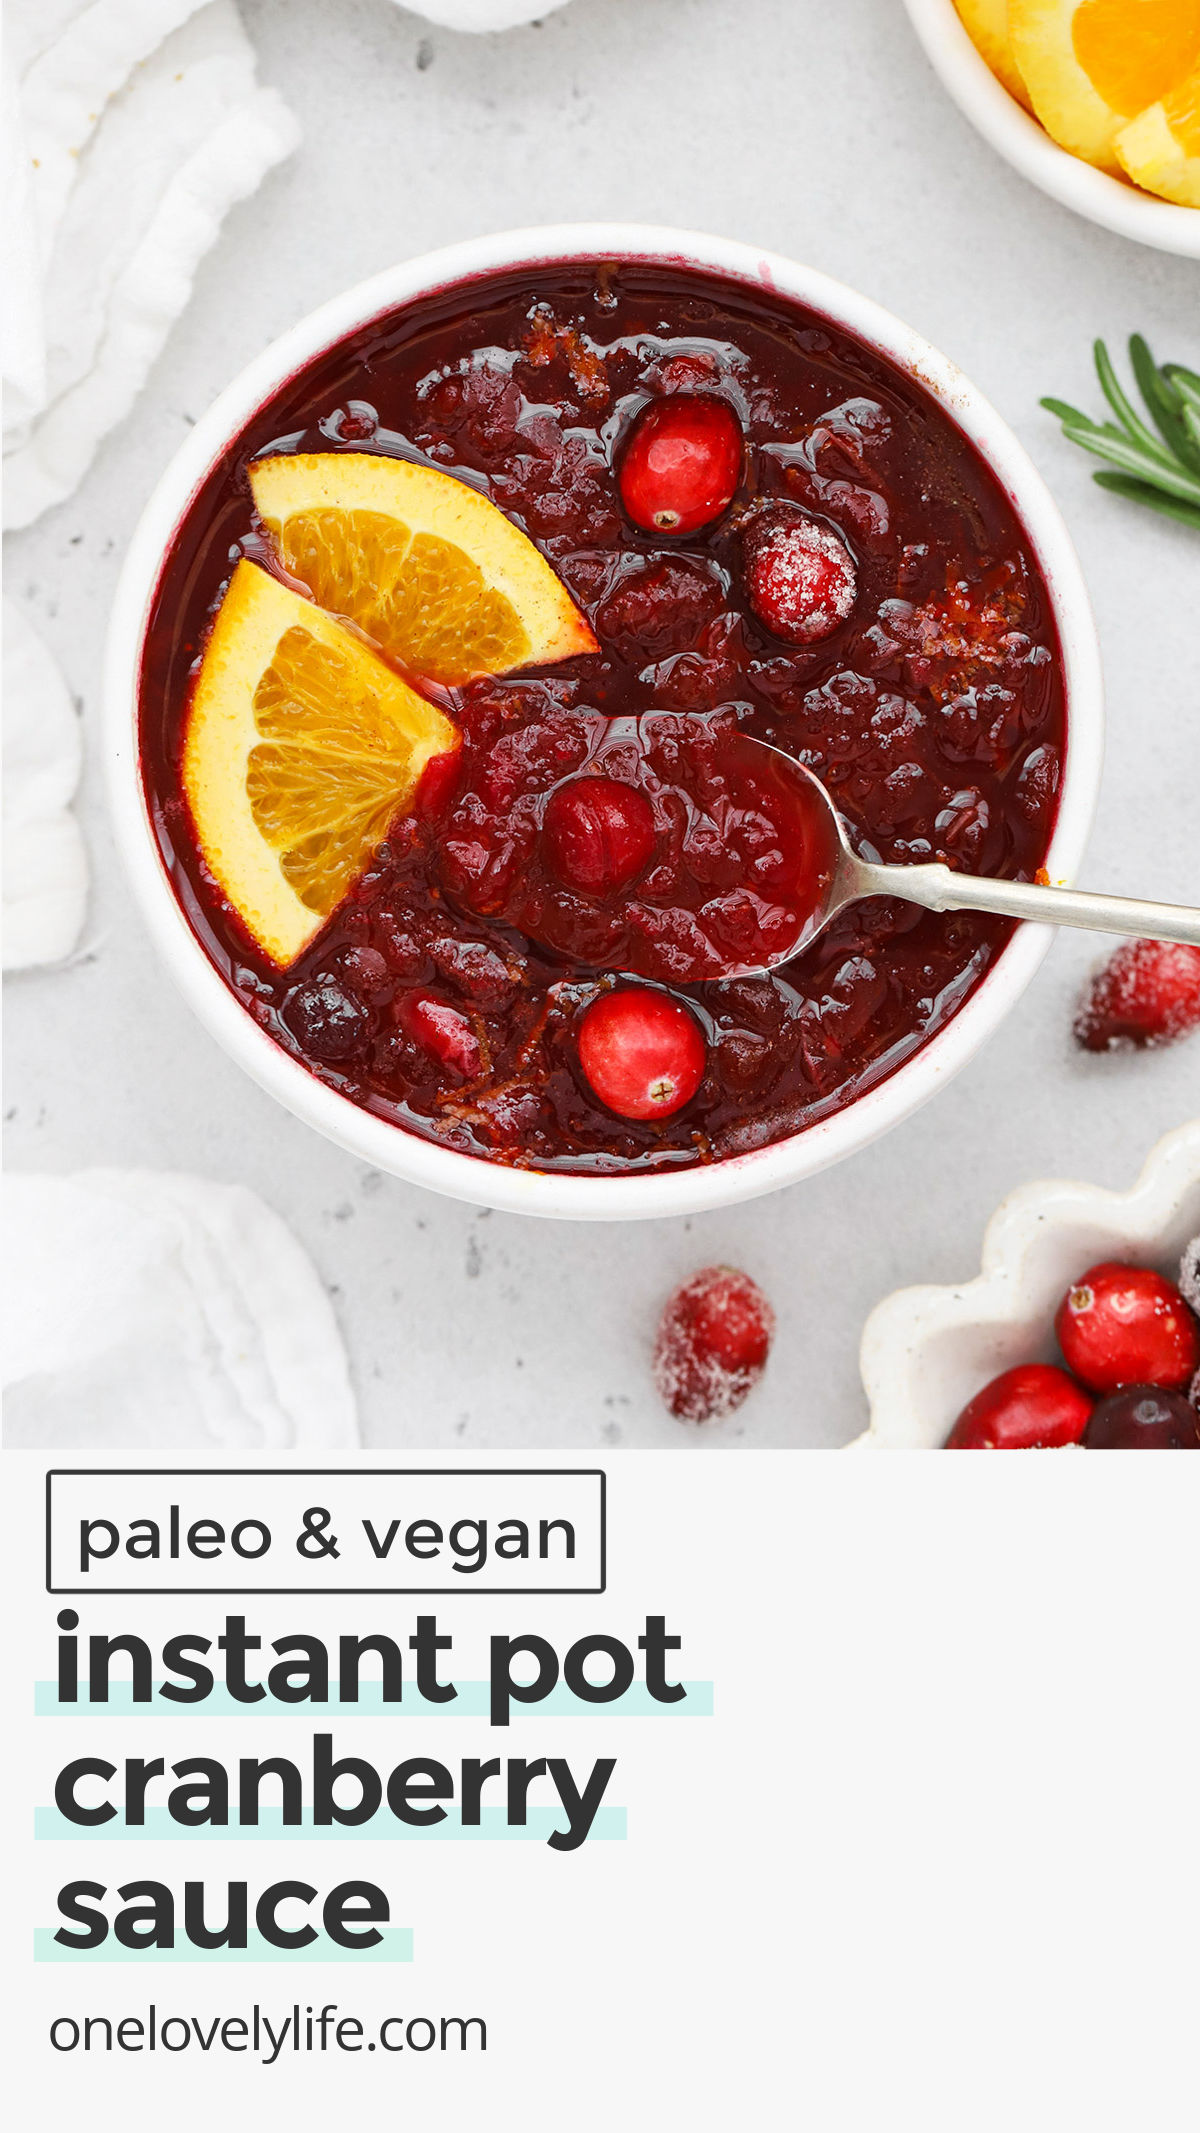 Instant Pot Cranberry Sauce - This pressure cooker cranberry sauce recipe couldn't be easier! (Naturally paleo, vegan & gluten-free) // instapot cranberry sauce / homemade cranberry sauce recipe / easy cranberry sauce recipe / instant pot thanksgiving recipes / instant pot christmas recipes / thanksgiving side dish / instant pot vegan cranberry sauce / instant pot paleo cranberry sauce /